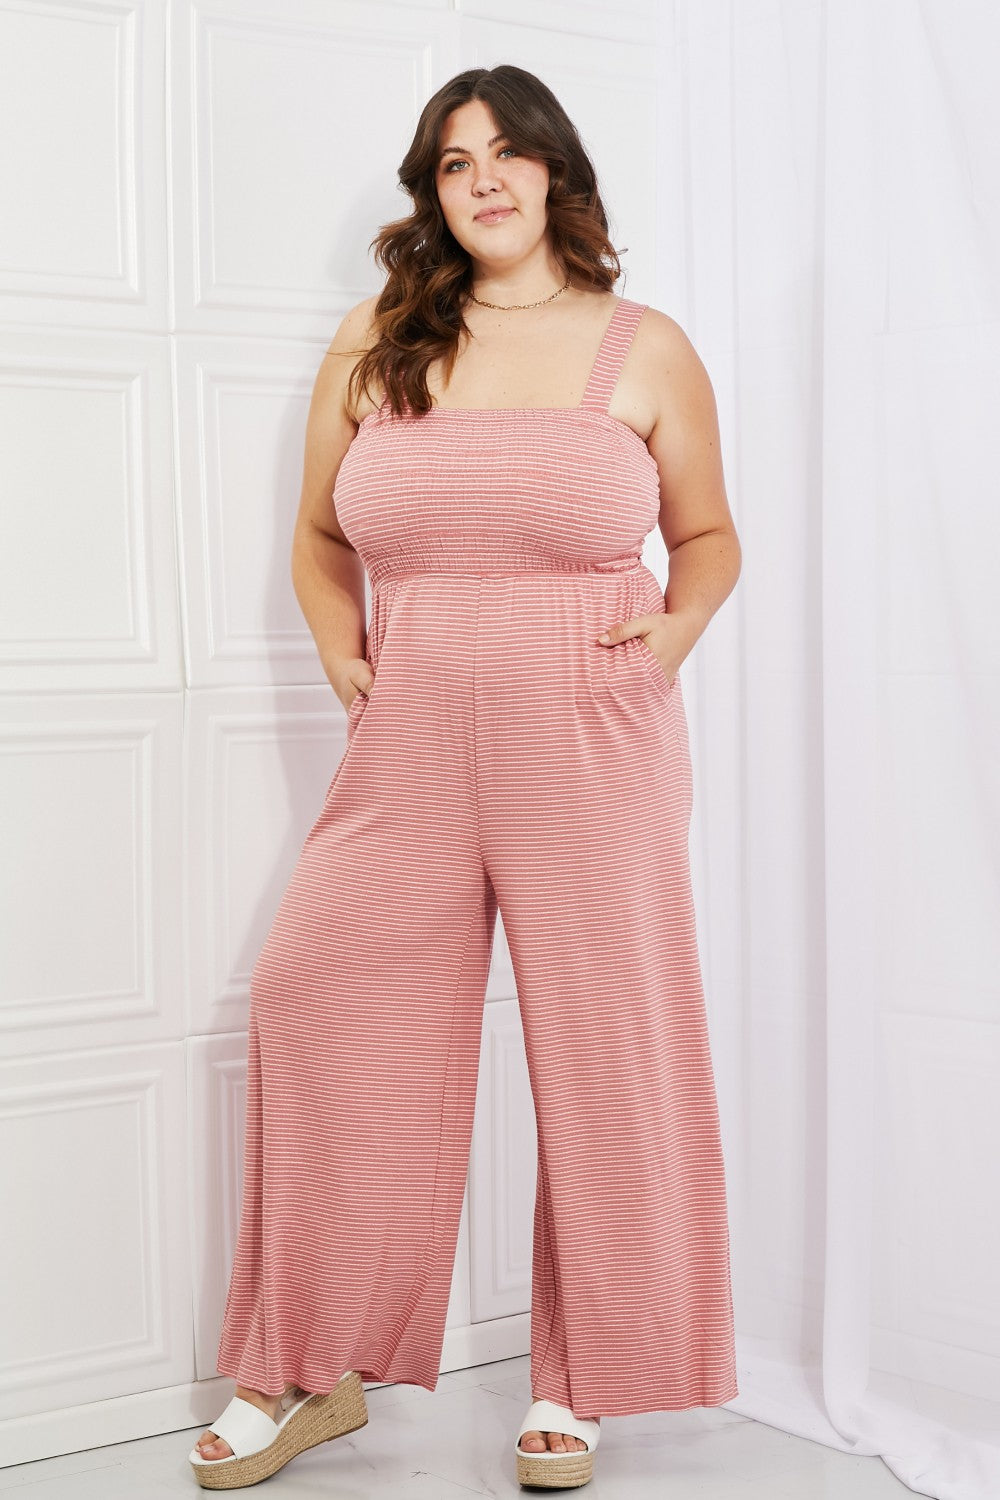 Only Exception Full Size Striped Jumpsuit